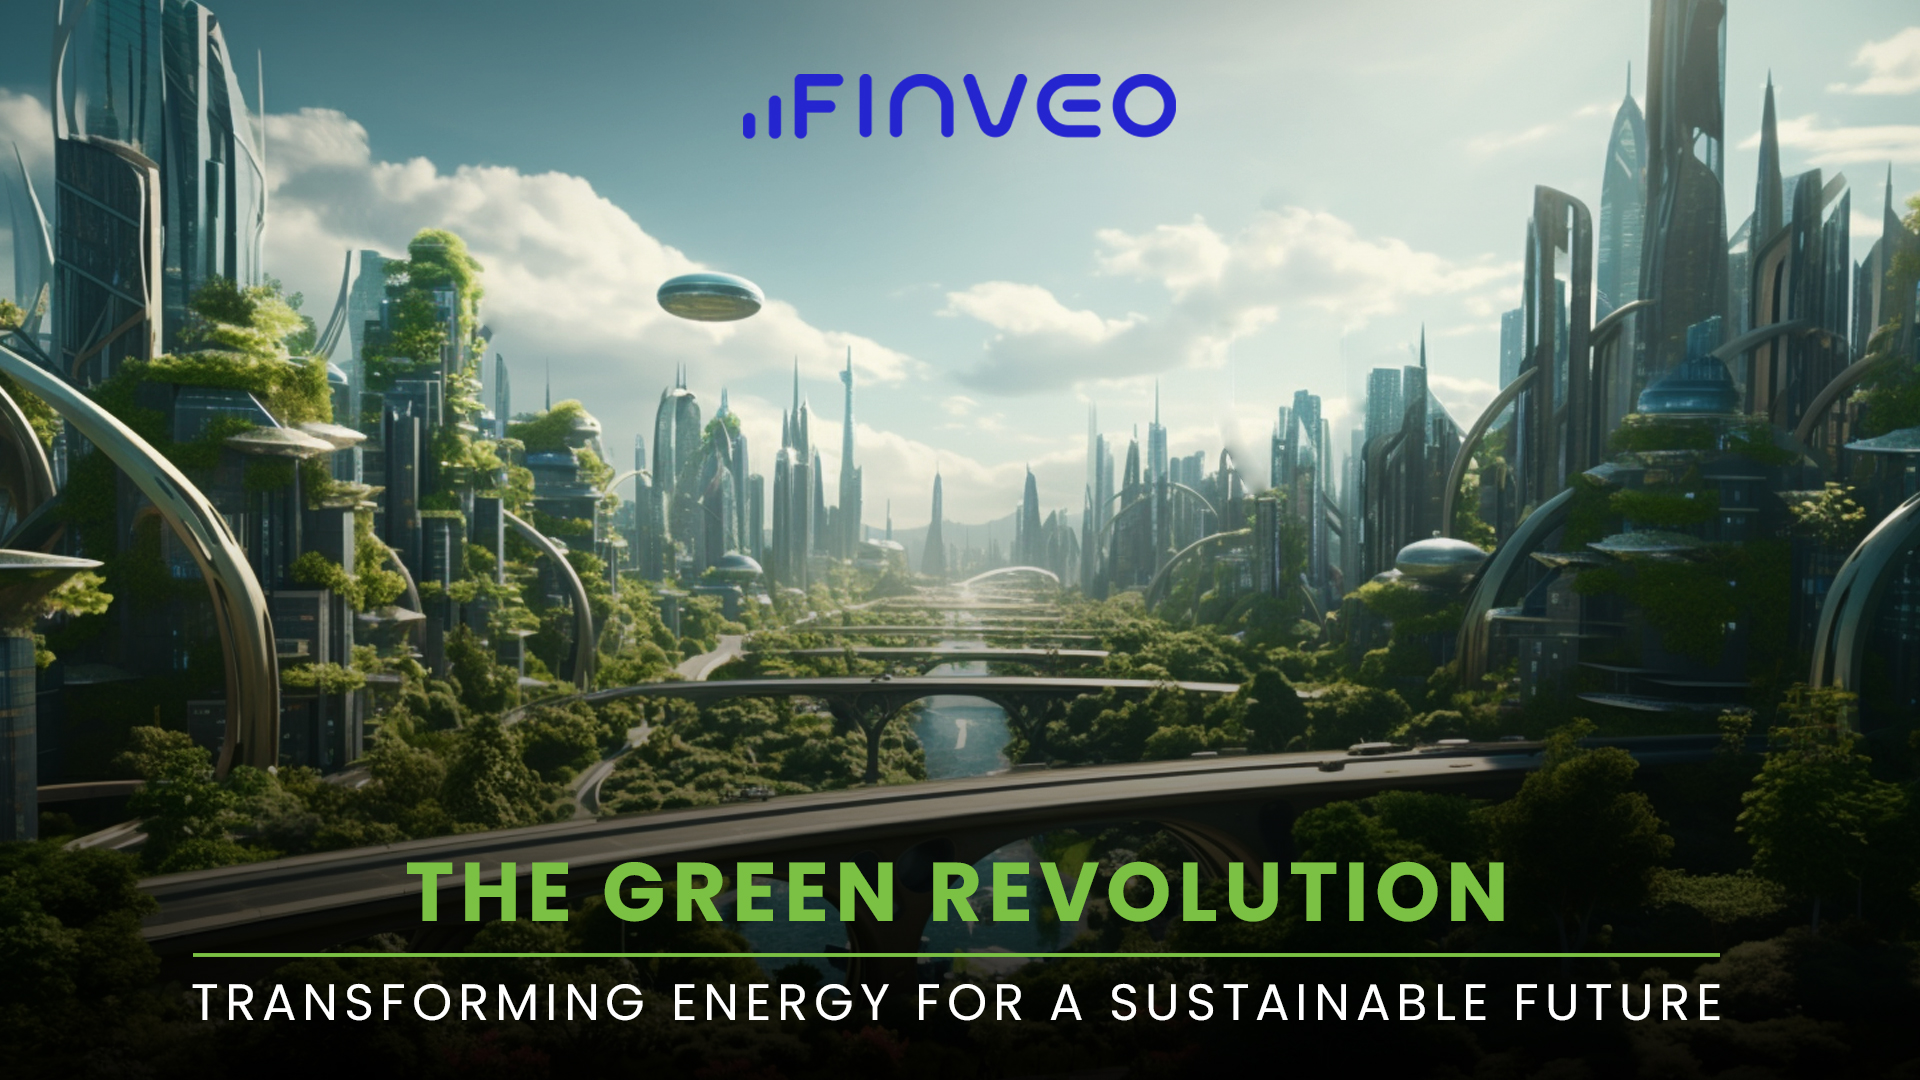 The Green Revolution: Transforming Energy for a Sustainable Future